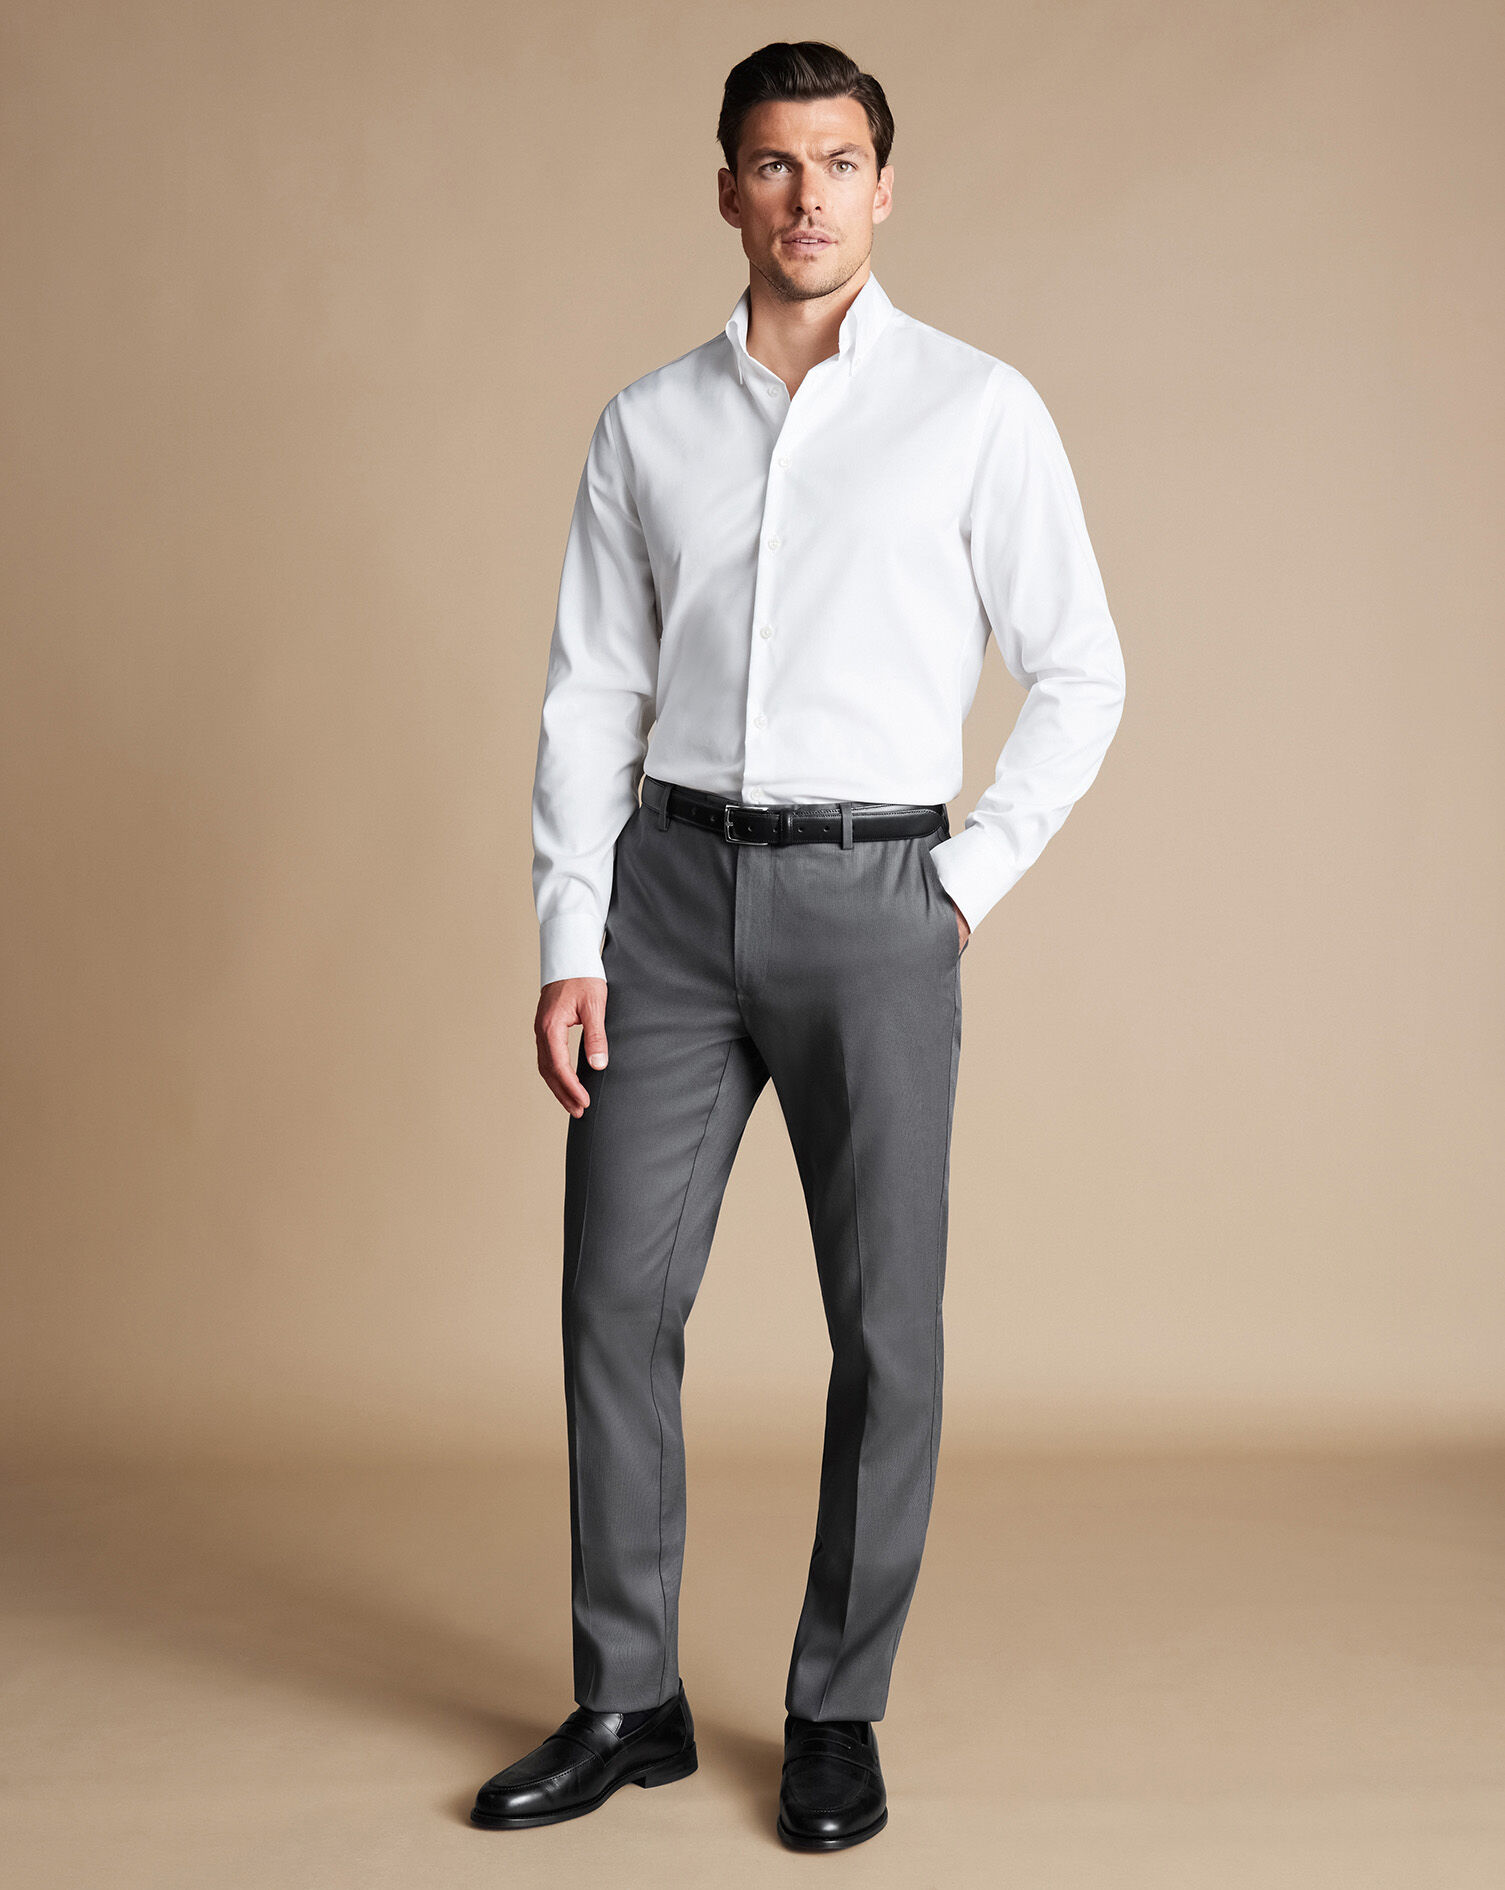 Summer smart/casual: Three looks, three levels of formality – Permanent  Style